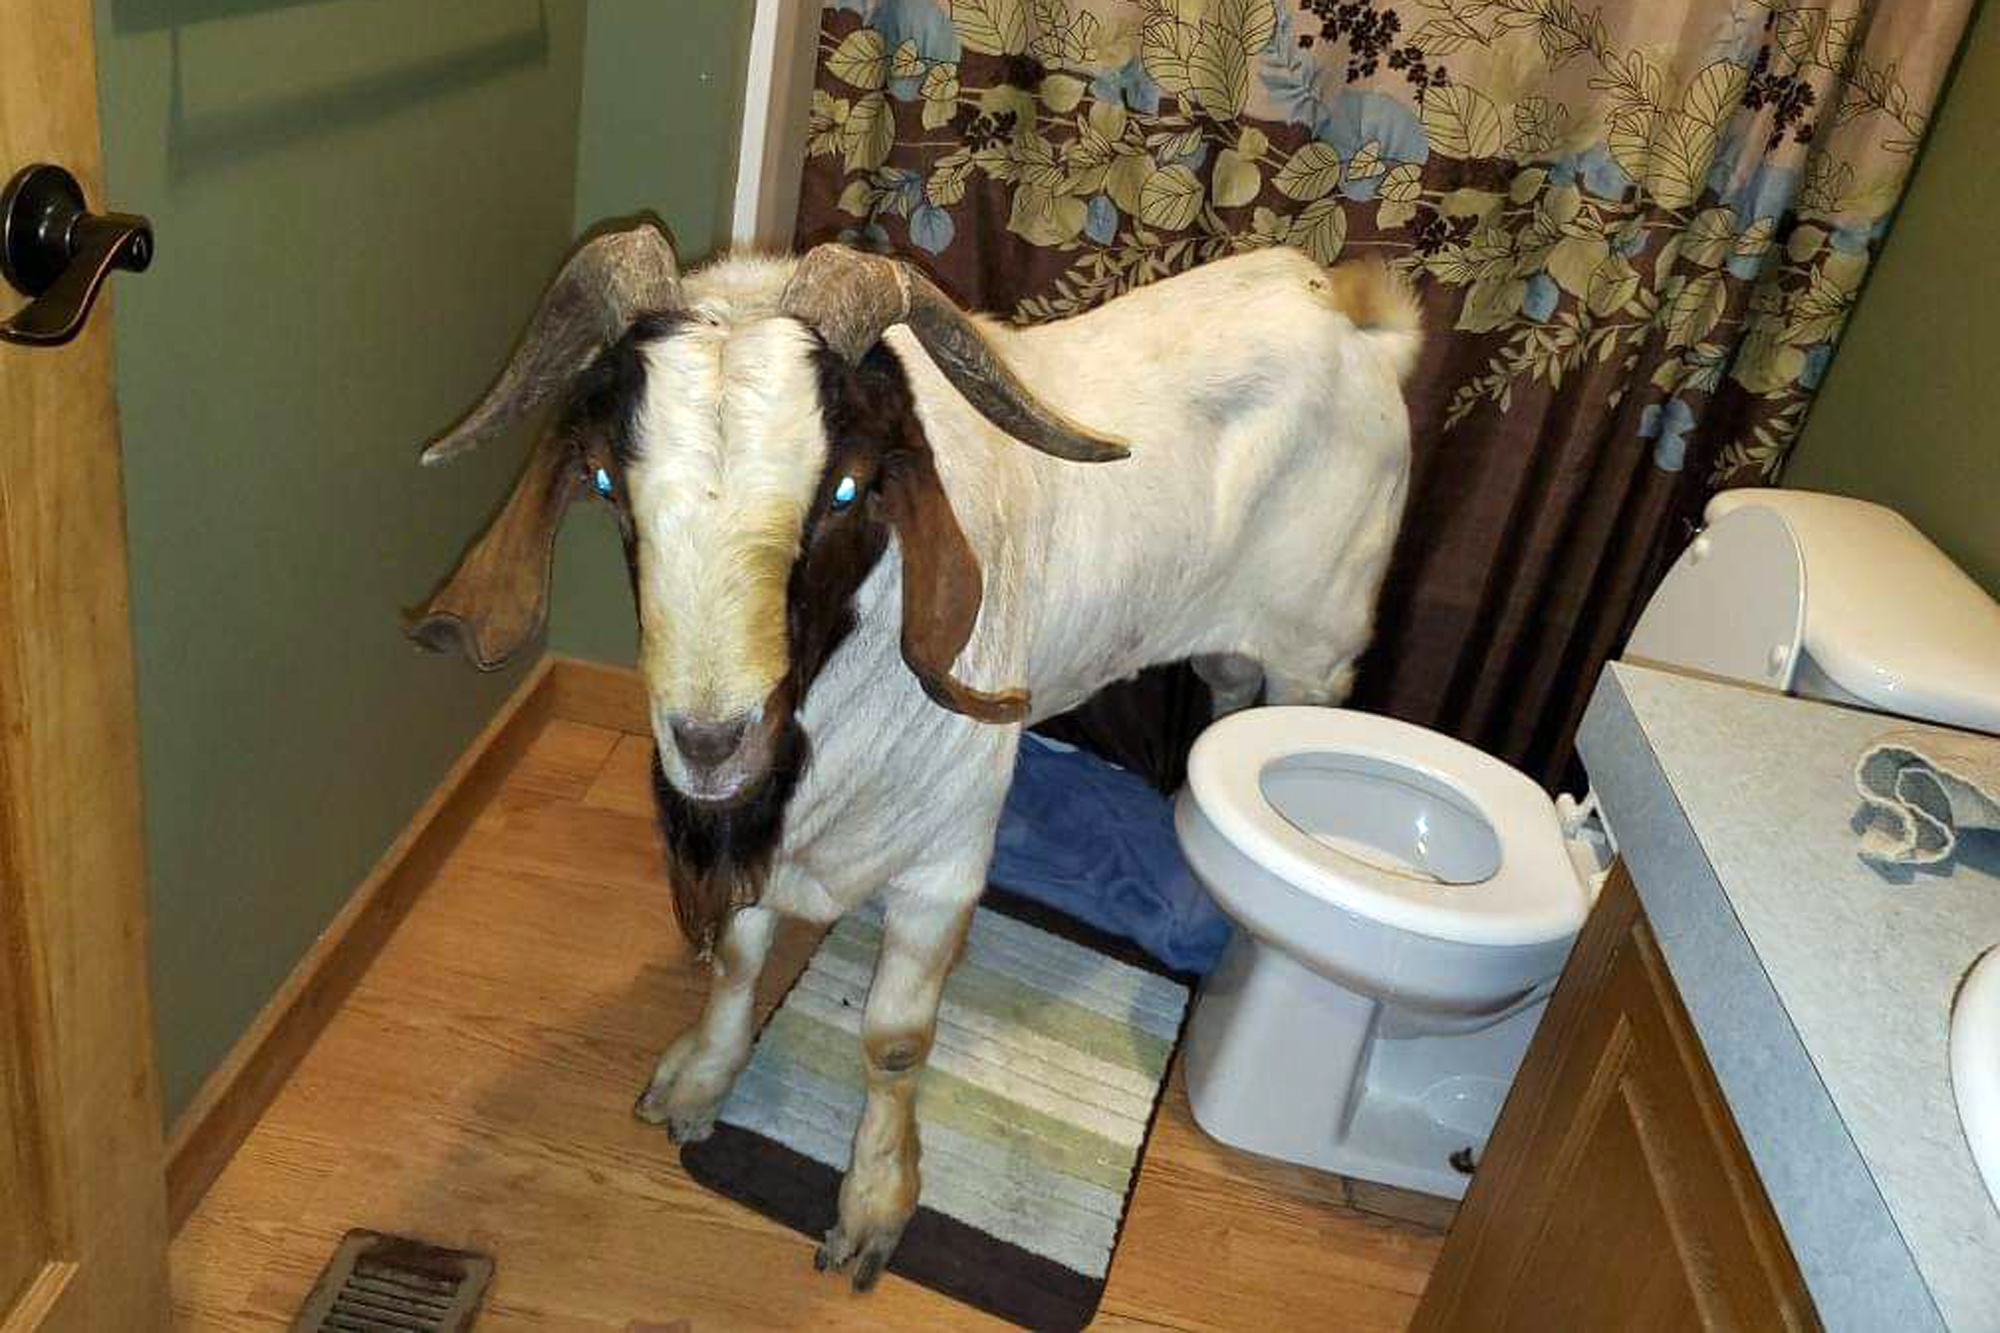 PHOTO: In this Friday, Oct. 4, 2019 photo, a goat stands in the bathroom of a home in Sullivan Township, Ohio. The goat named "Big Boy," was found napping in the bathroom after it broke into the home by ramming through a sliding glass door. 